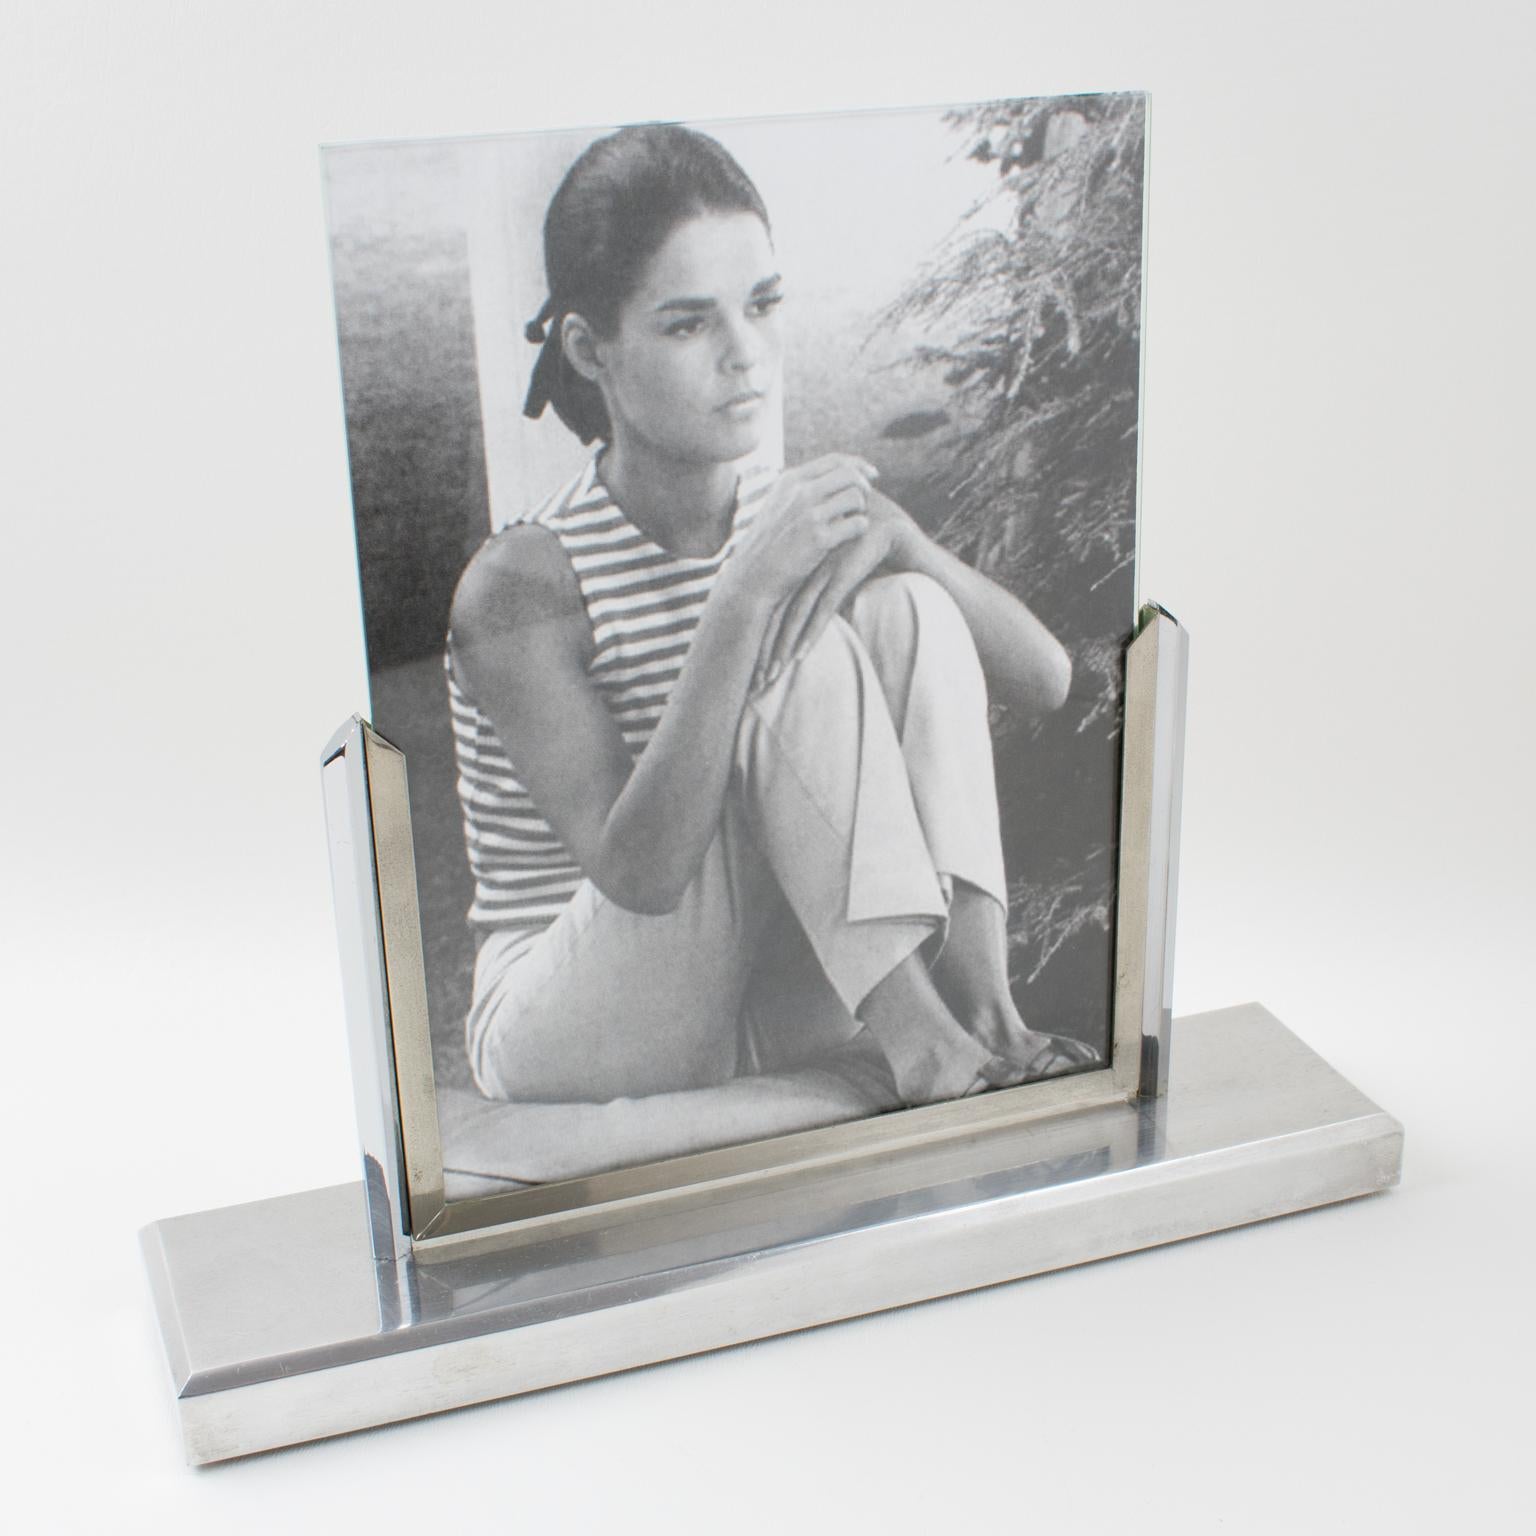 Lovely French Art Deco picture photo frame. Architectural polished aluminum shape with a raised rectangular base and two vertical frame-holders with swing support. The two supports hold two glass sheets that can hold a photo or image.